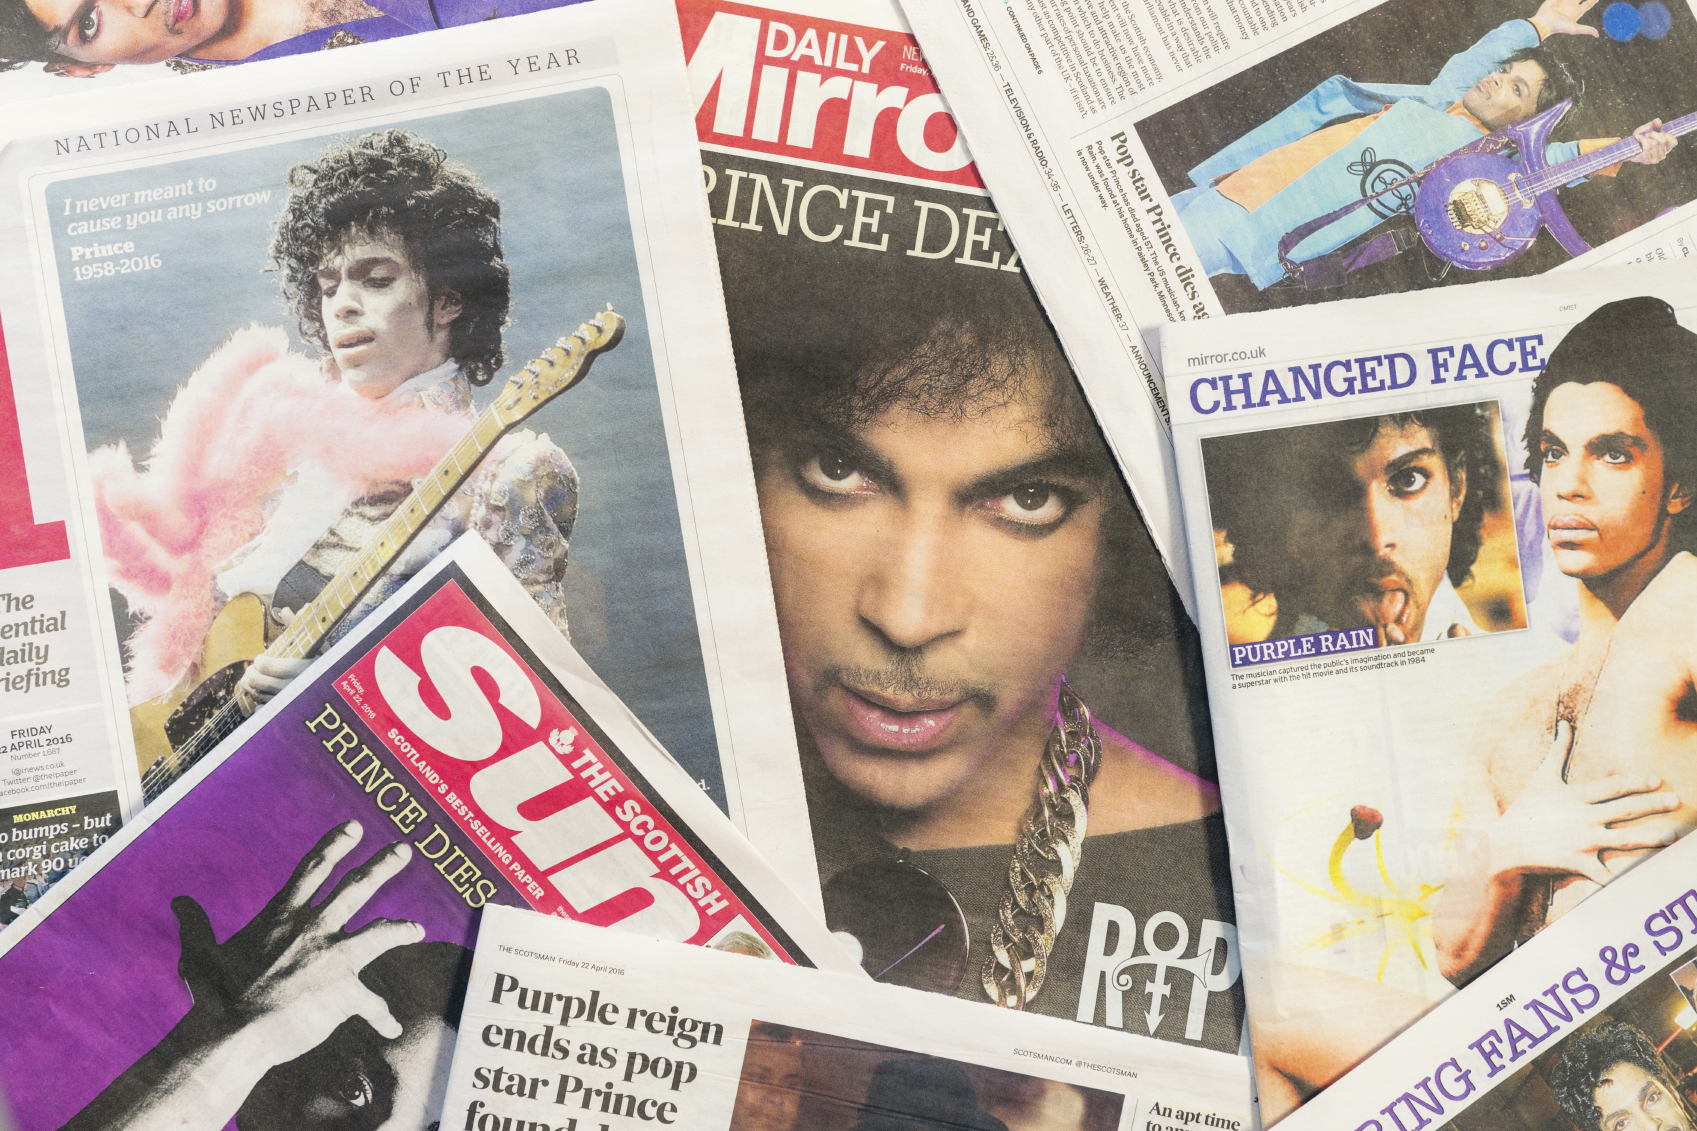 Edinburgh, UK - April 22, 2016: A selection of British newspapers featuring the musician Prince, following news of his death on 21st April 2016. Born in Minneapolis in 1958, Prince received widespread appreciation for his musical innovation and skill, as well as his commercial success.
UK newspapers featuring Prince, published in tribute following his death on 21st April 2016.
All artist royalties from sales of this file and others in the lightbox linked to below are donated to Oxfam, an international charity committed to finding lasting solutions to poverty and related injustice around the world.
Please click here to see the files in the Oxfam Donation lightbox.
Lightbox royalties donated to 1st August 2015: GBP 1,823.56 (USD 2,850.88)
Next date for donations: 1st August 2016